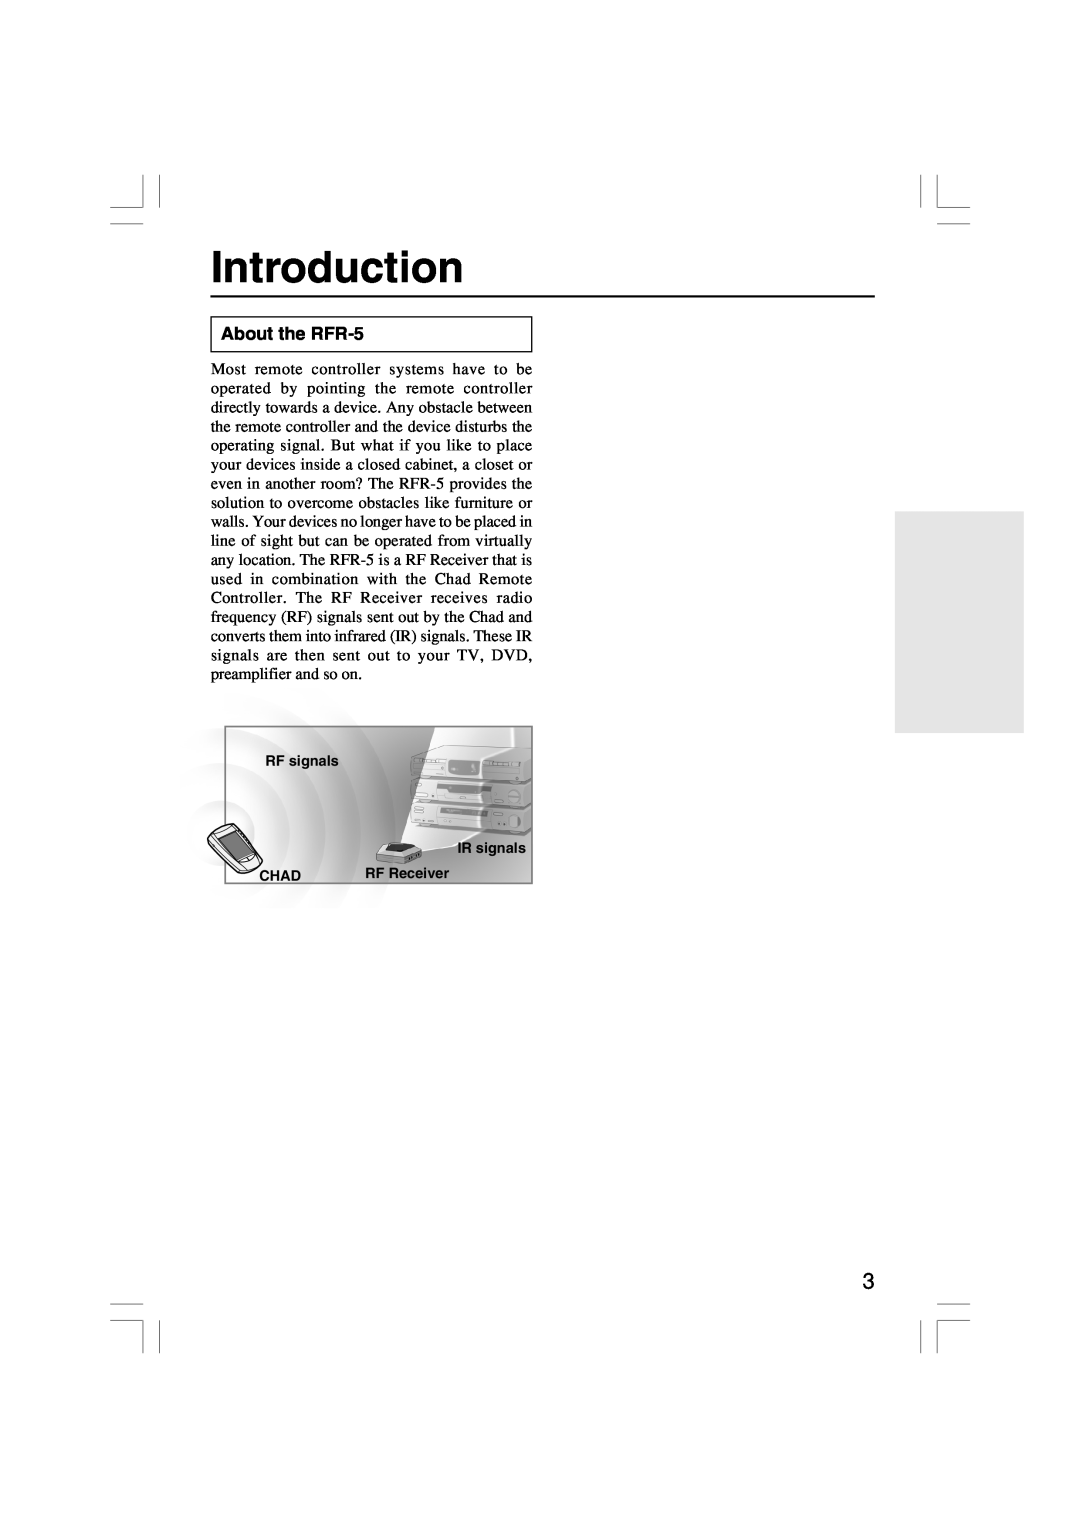 Onkyo instruction manual Introduction, About the RFR-5 